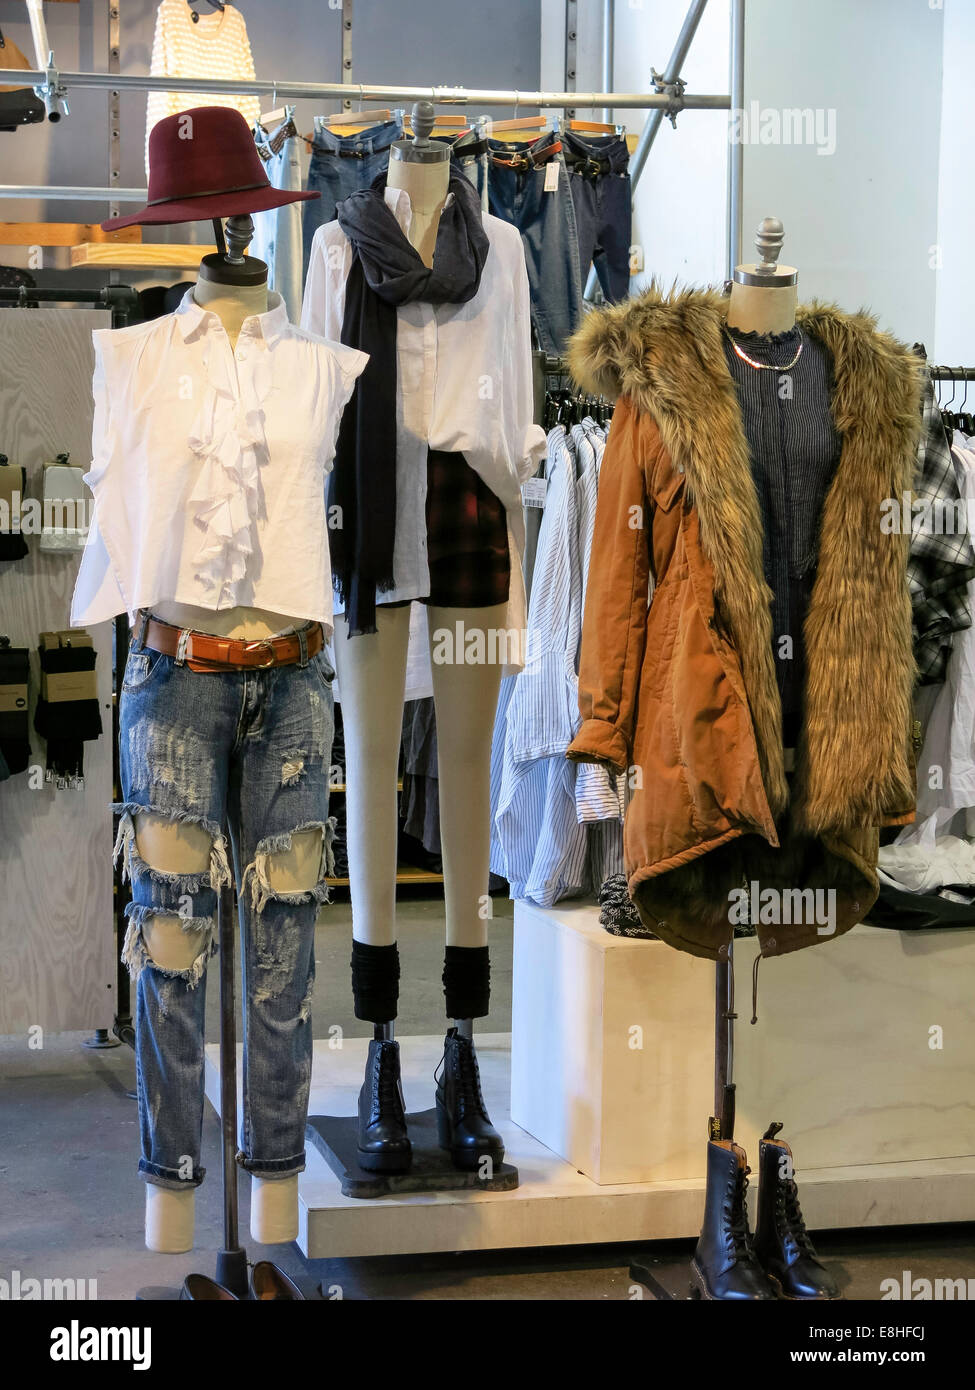 Damen Kleidung Display, Urban Outfitters Store am Herald Square, New York  Stockfotografie - Alamy